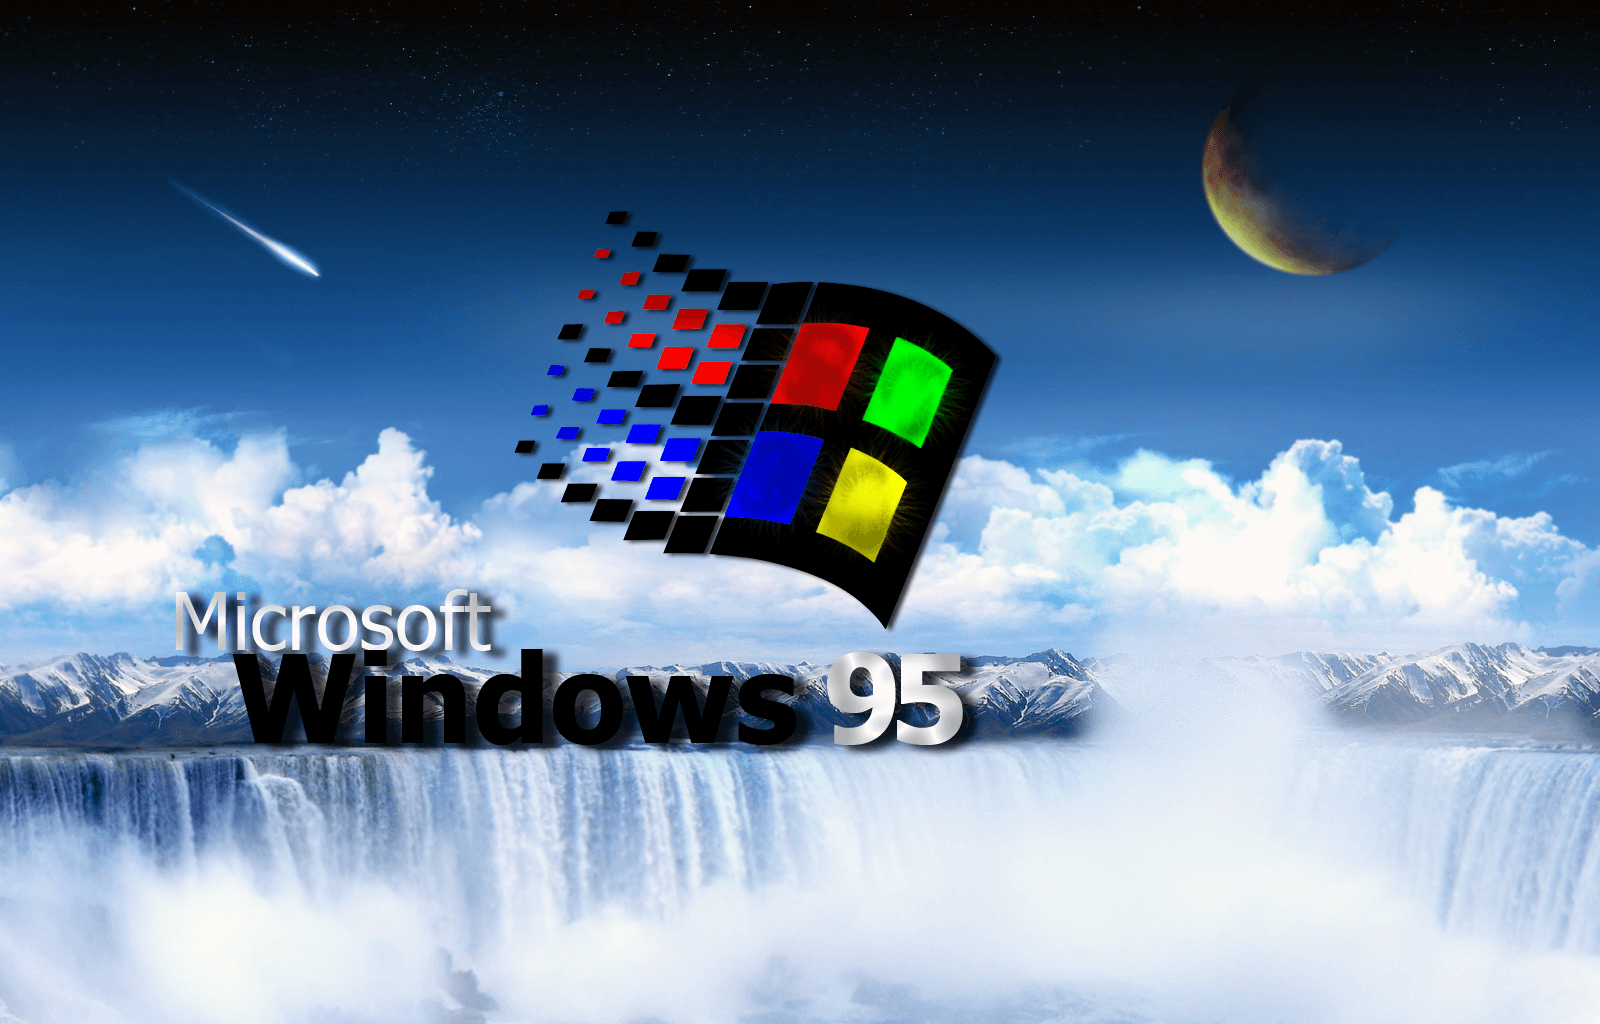 Explore what Windows 95 has to offer